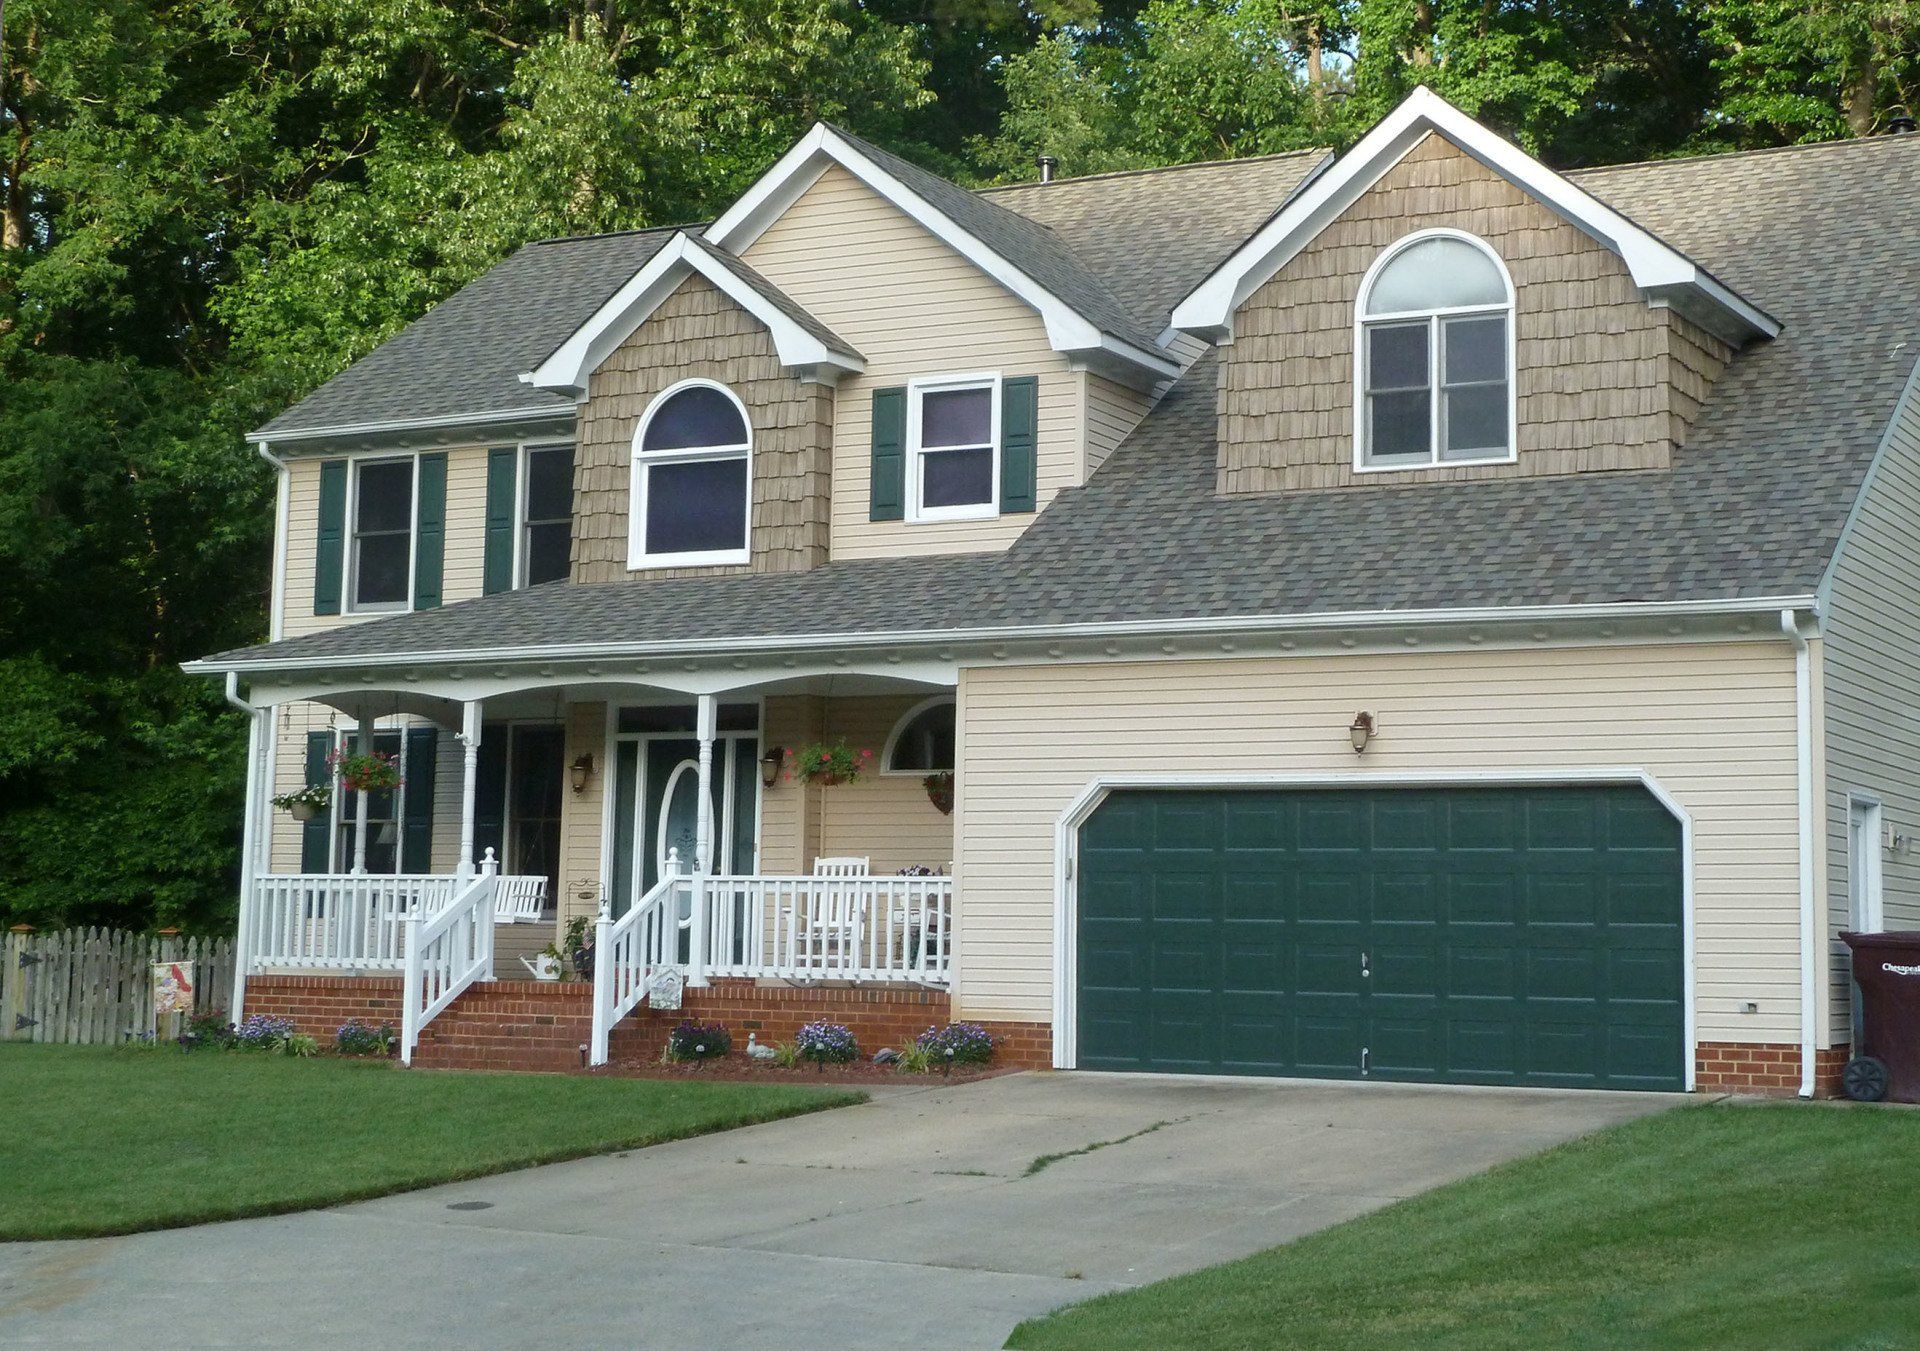 Roofing Contractor — New Roof, Vinyl Siding, Trim Wrap and Gutters in Chesapeake, VA, 757, Roofing Contractor, Hampton Roads Roofing Contractor, 5 star roofing contractor, roofing company near me, roofer near me, Stublen Roofing